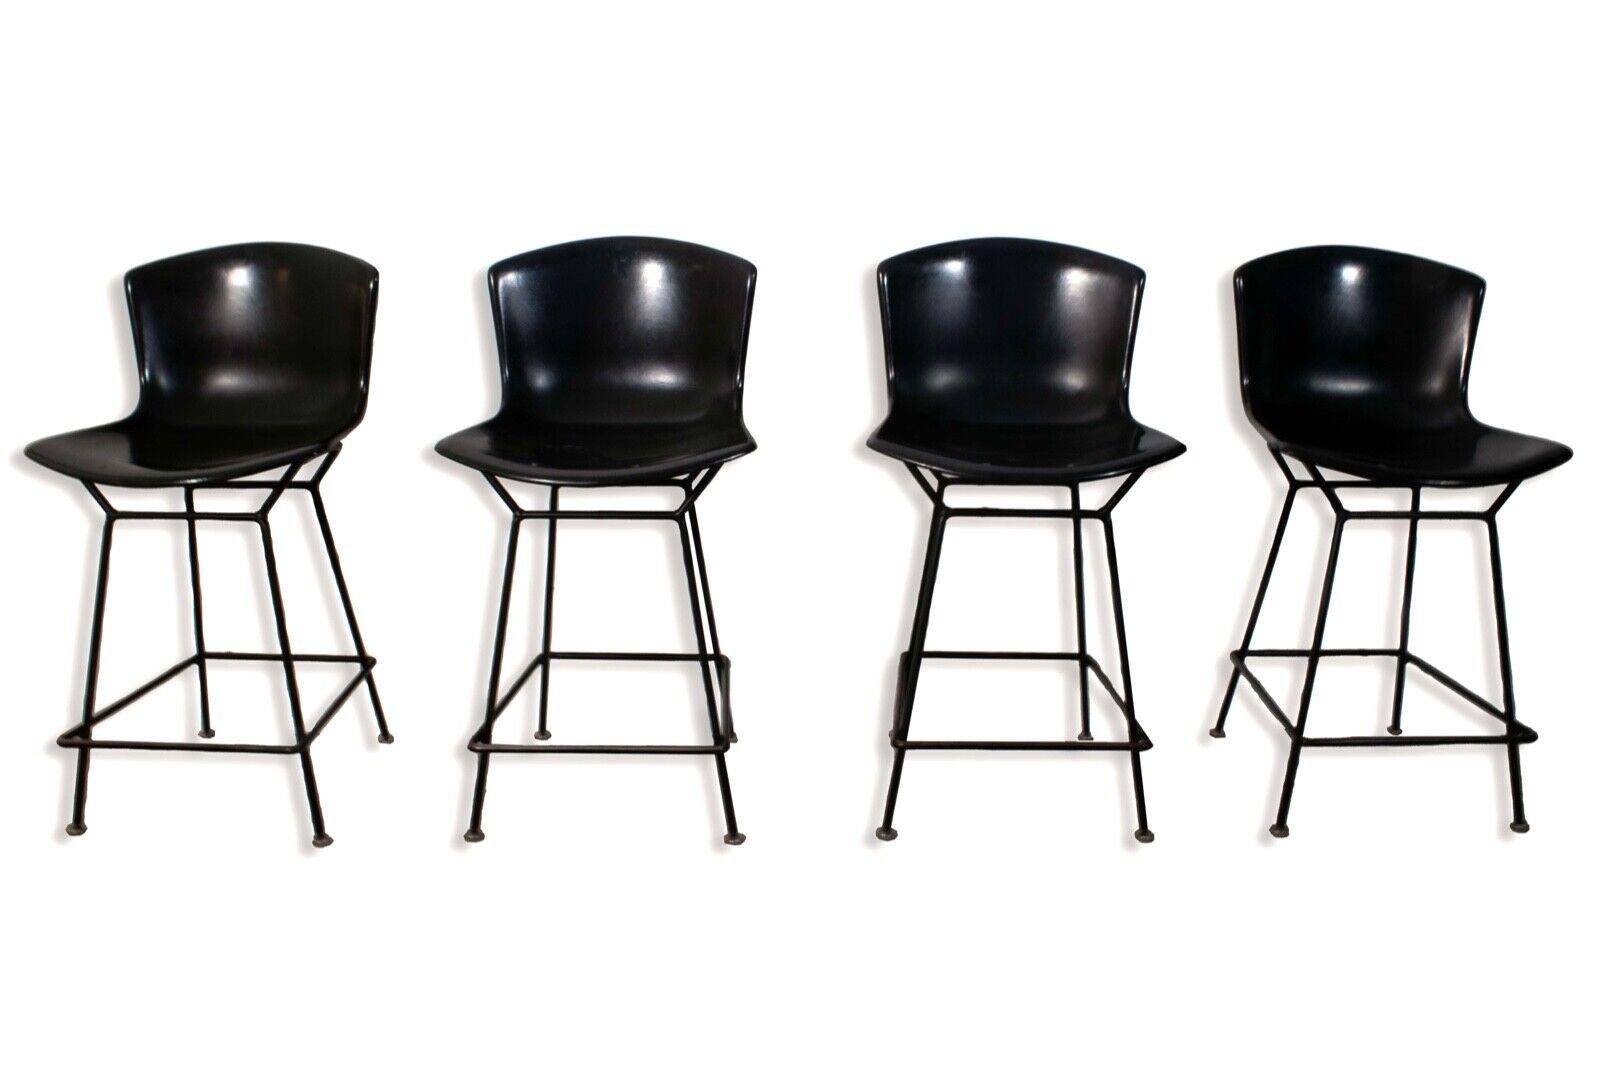 This set of five early vintage Knoll black barstools epitomizes timeless elegance and sophistication. With meticulous attention to detail, each barstool showcases the iconic design principles for which Knoll is renowned. Crafted from high-quality